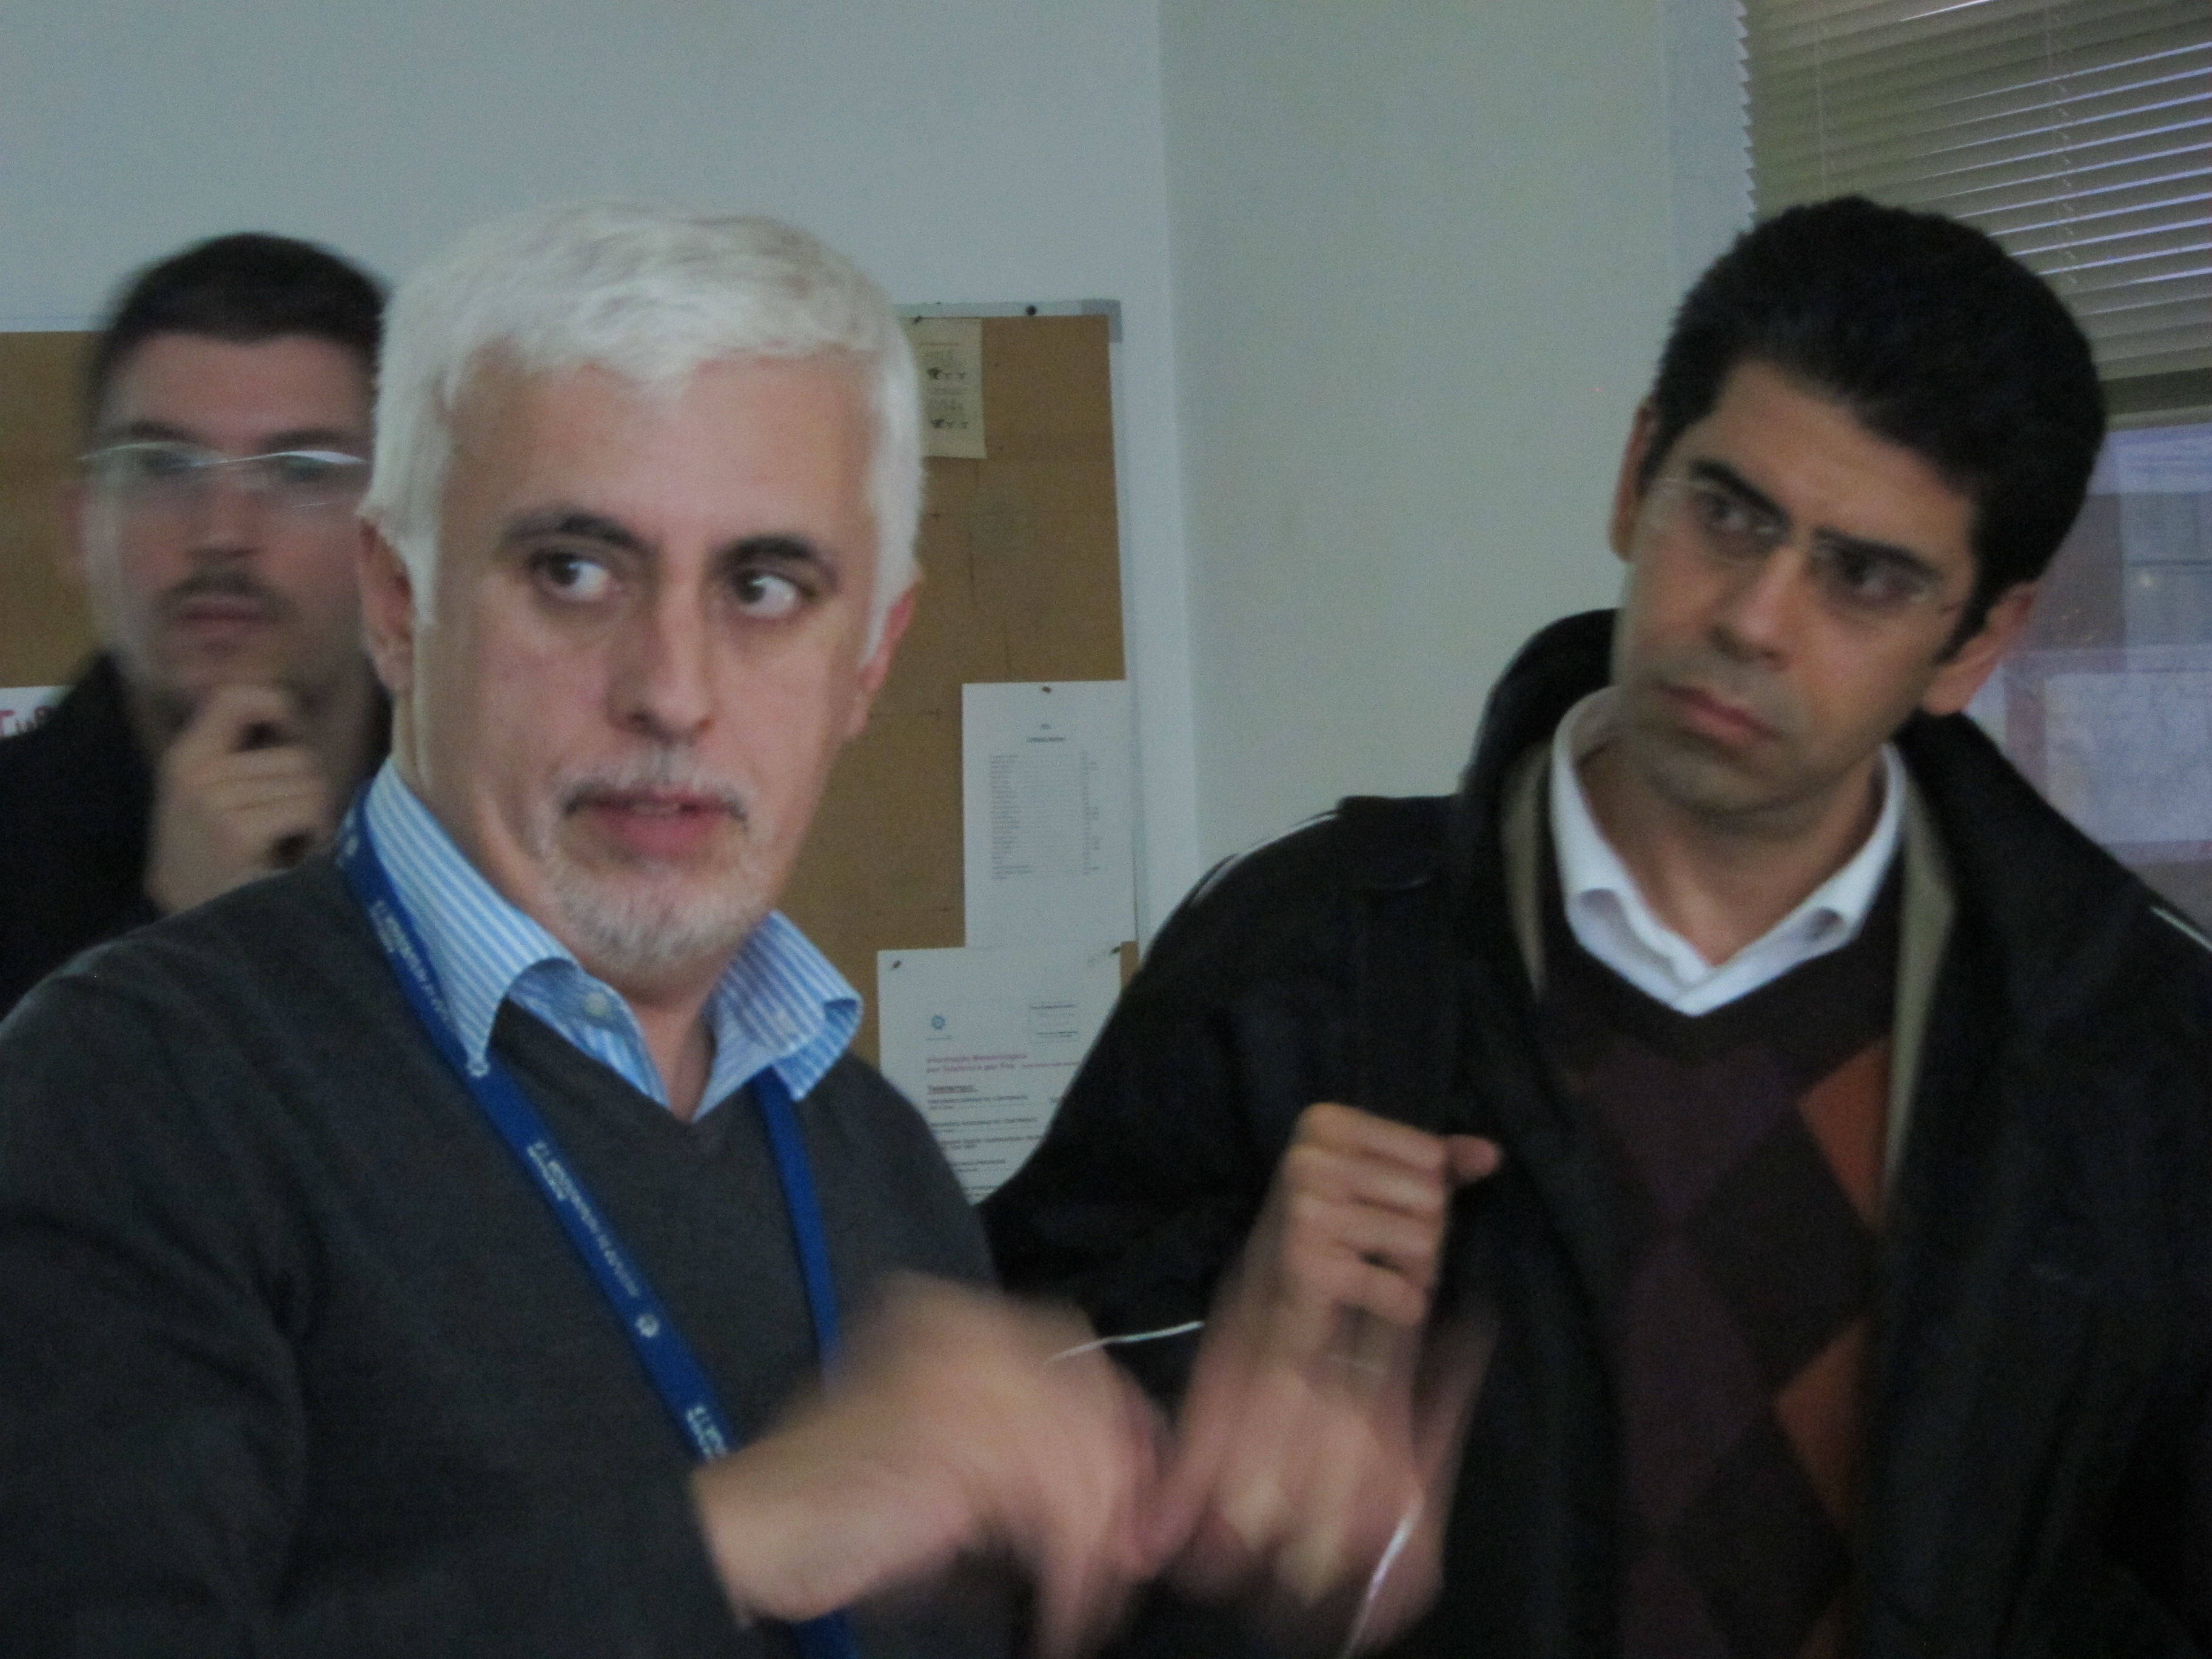 Dr. Fernando Carillho of IPMA in Lisbon giving directions to the personnel on duty